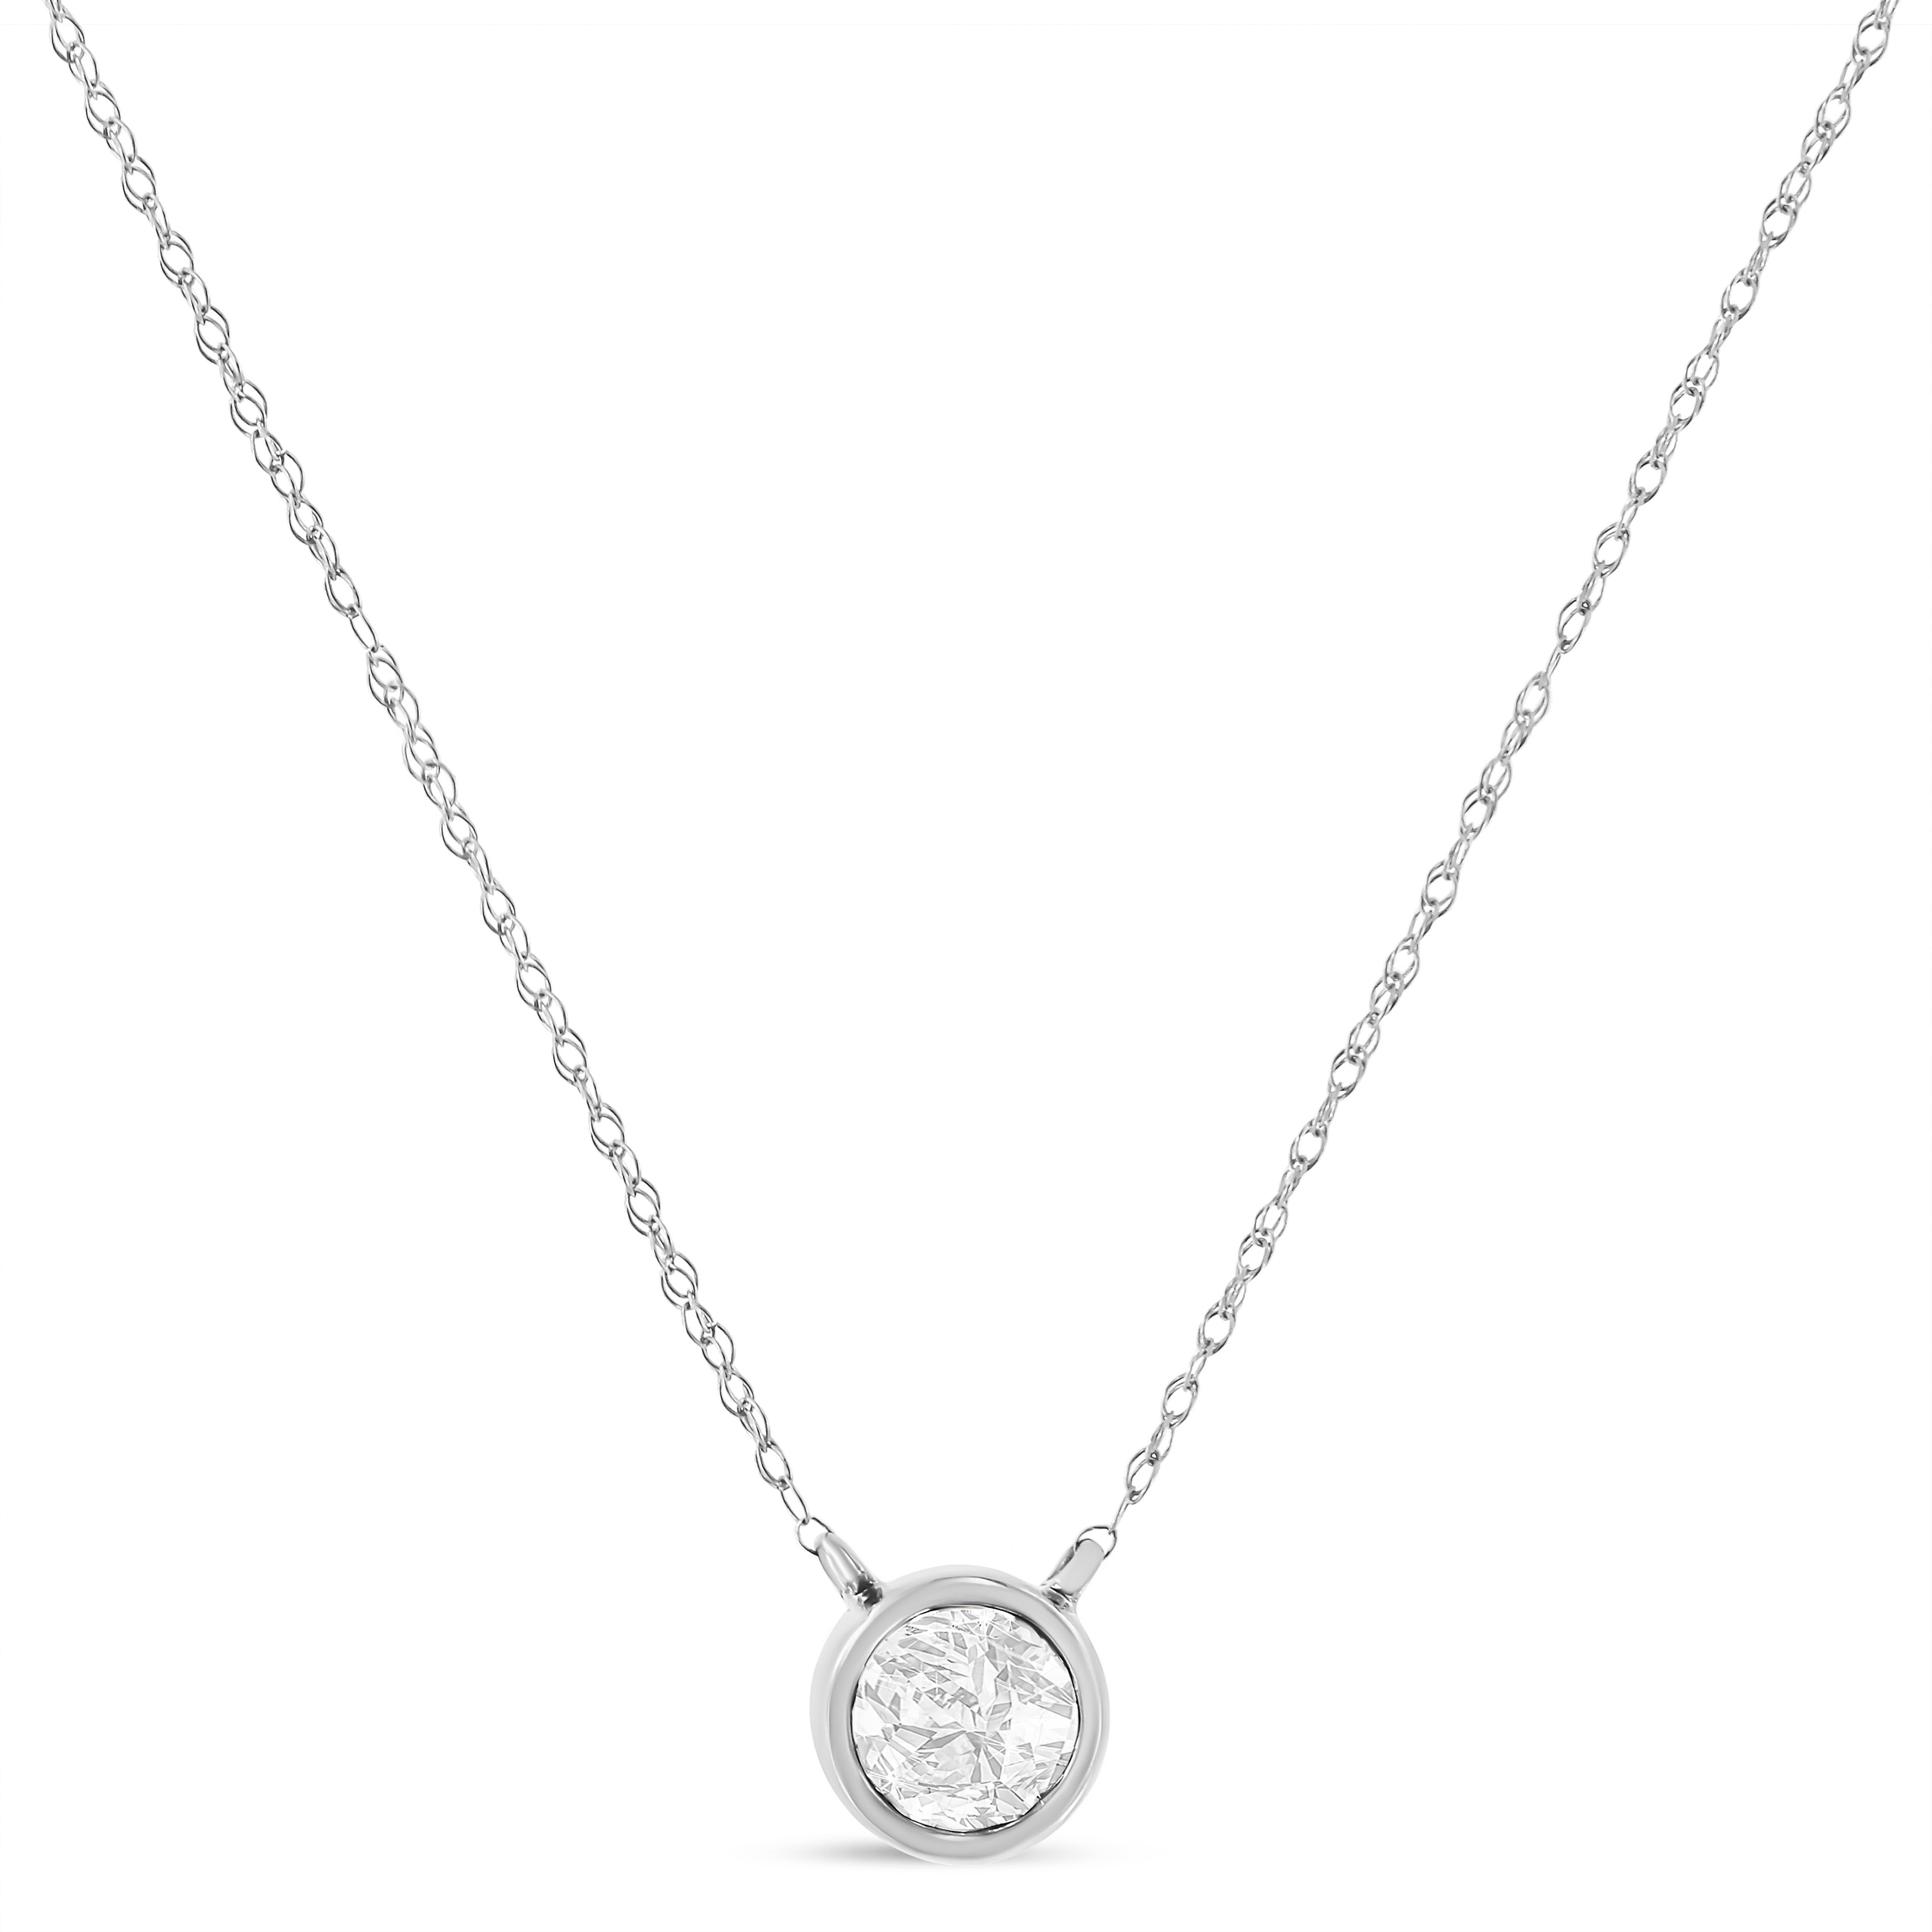 Some things shouldn't be reinvented, which is why we created the solitaire diamond necklace. This understated yet dazzling diamond-forward piece is the perfect way to highlight every big occasion, transition, and personal achievement in your life.